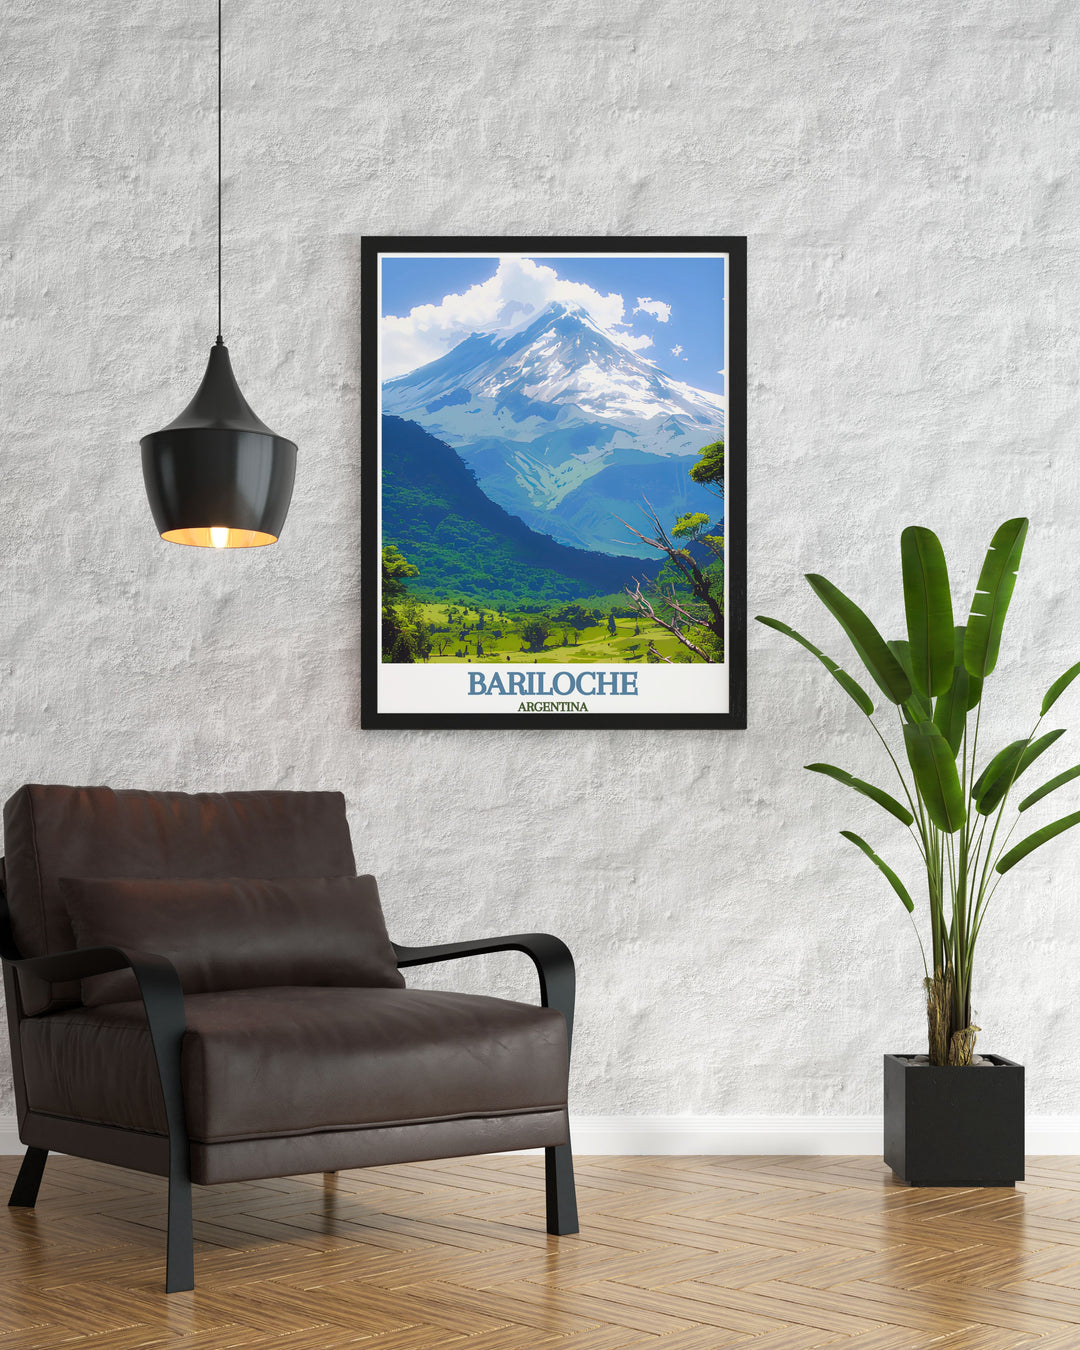 Beautiful Bariloche travel poster capturing the serene Tronador Volcano and vibrant San Carlos, reflecting Argentinas unique landscapes. Ideal for those who appreciate the beauty of the Andes and the charm of Bariloche.